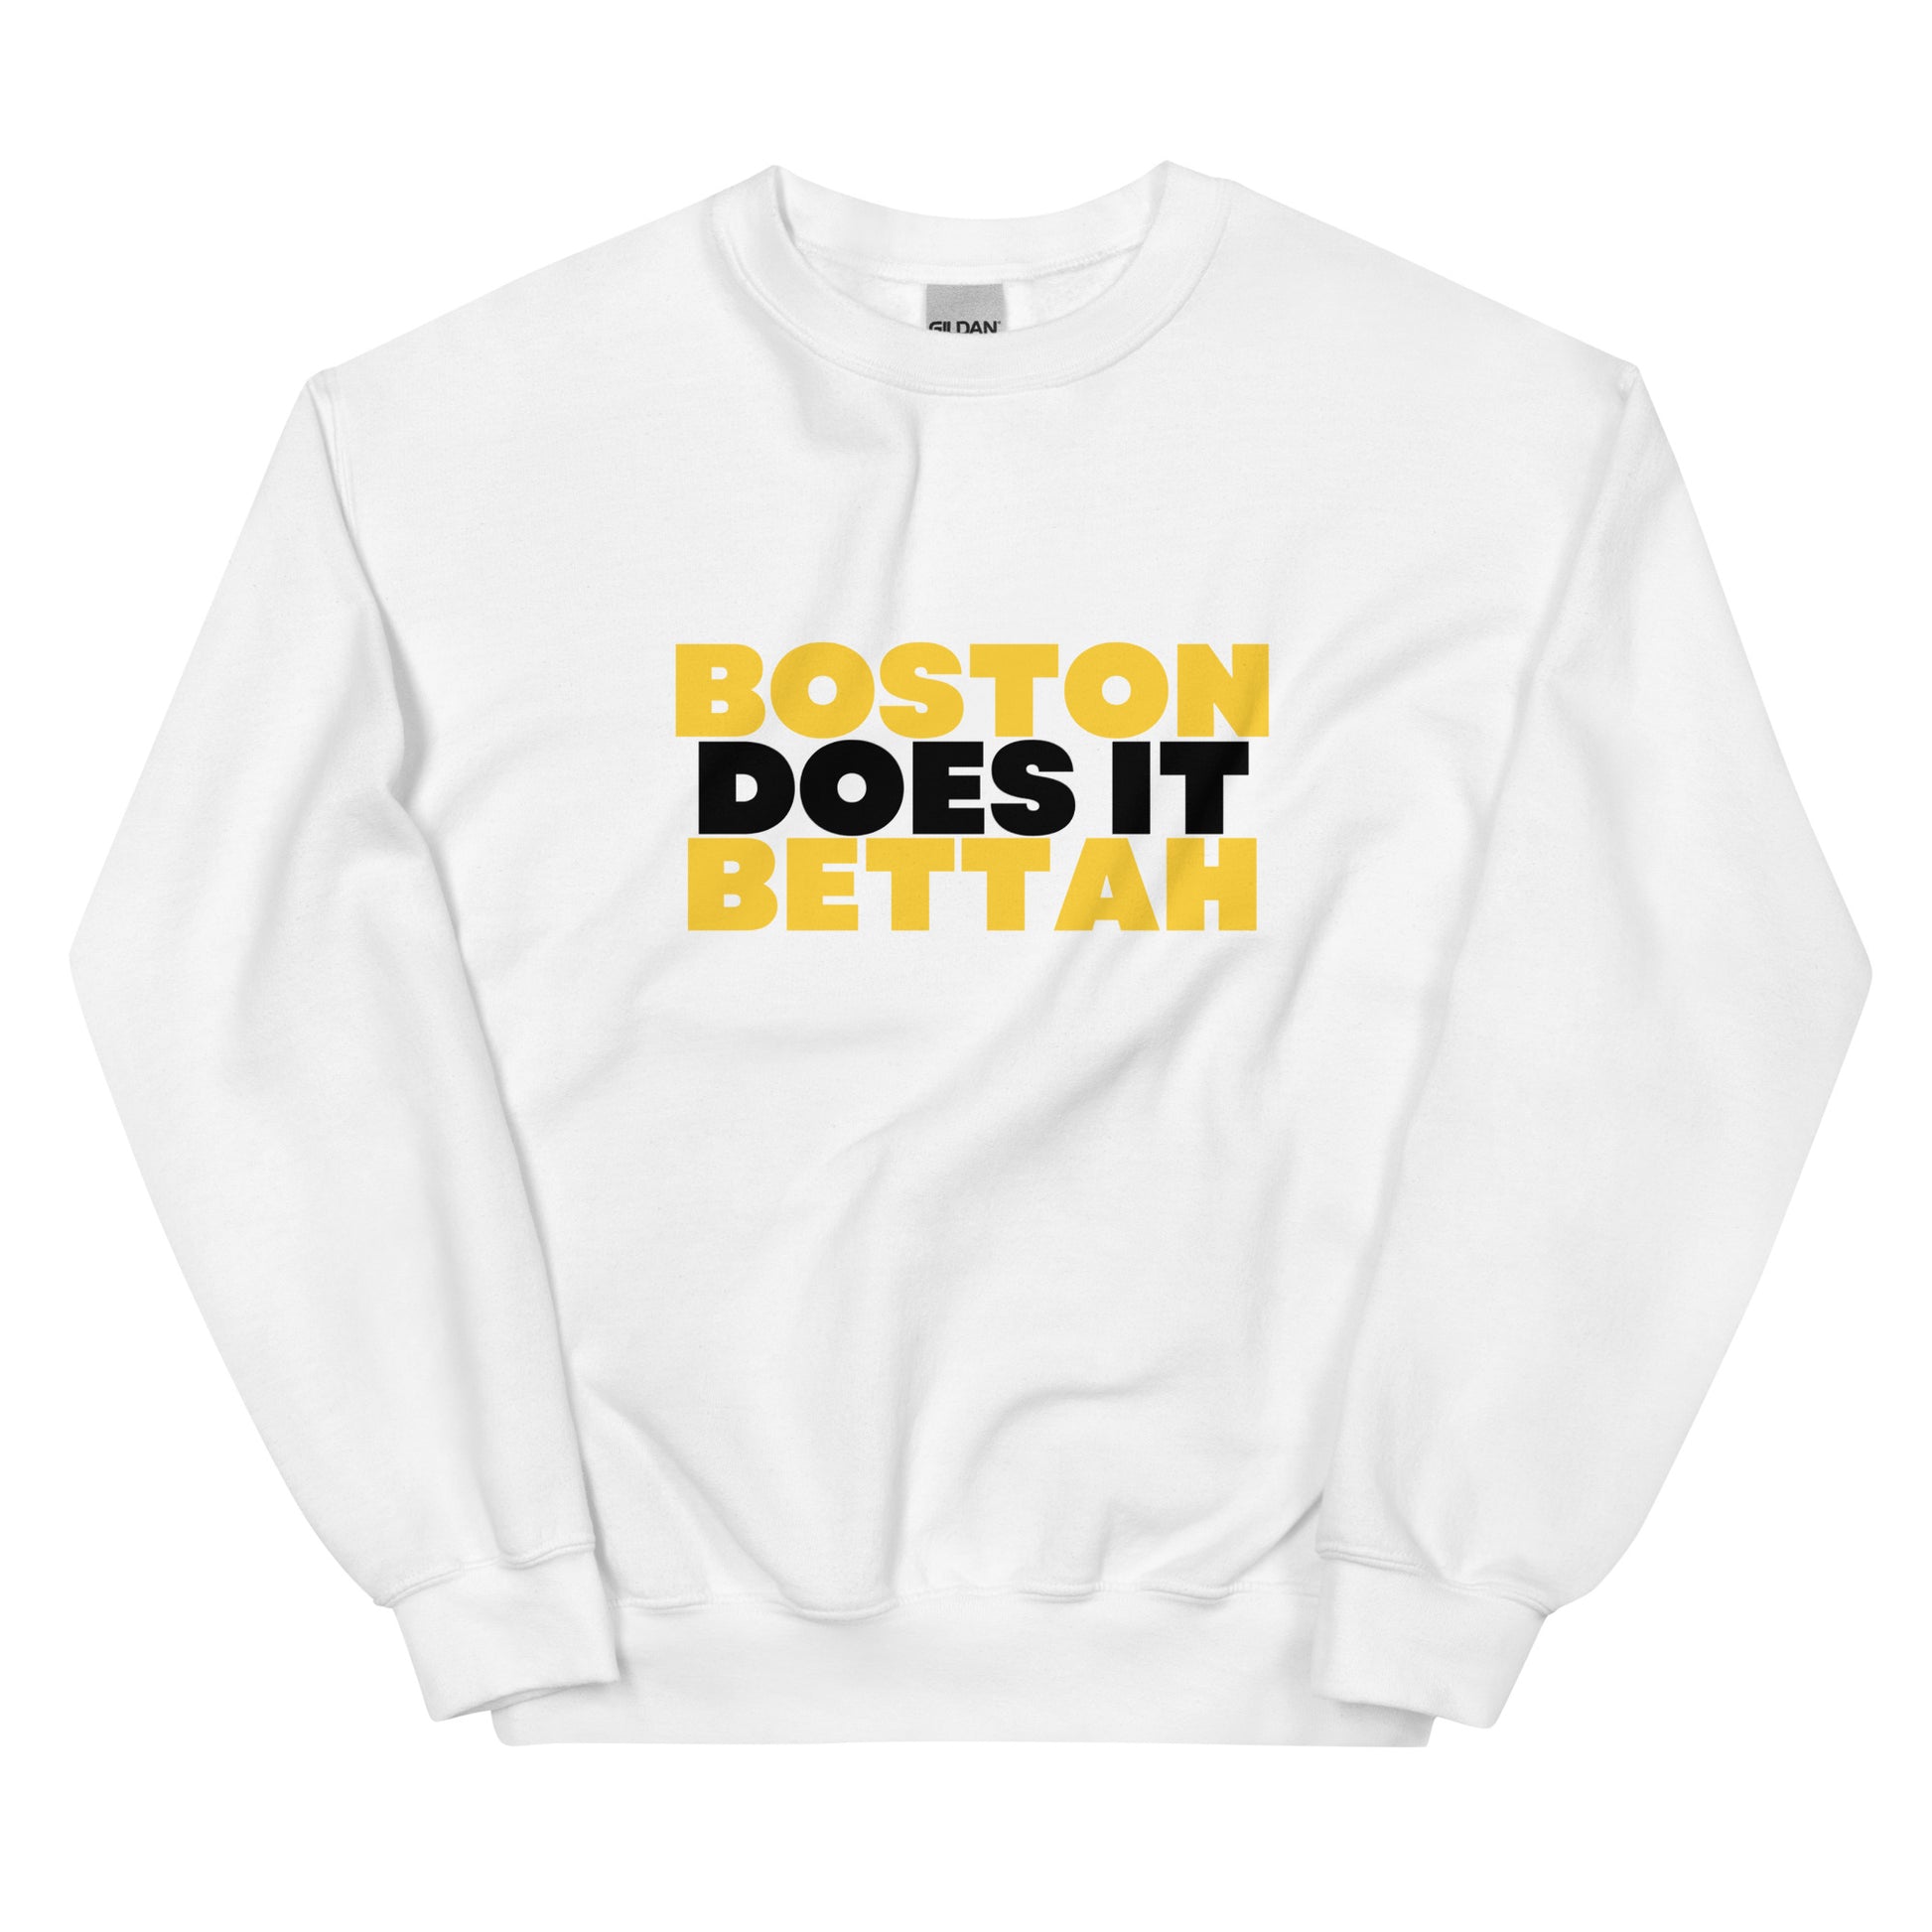 white crewneck that says "Boston Does It Bettah" in gold and black lettering